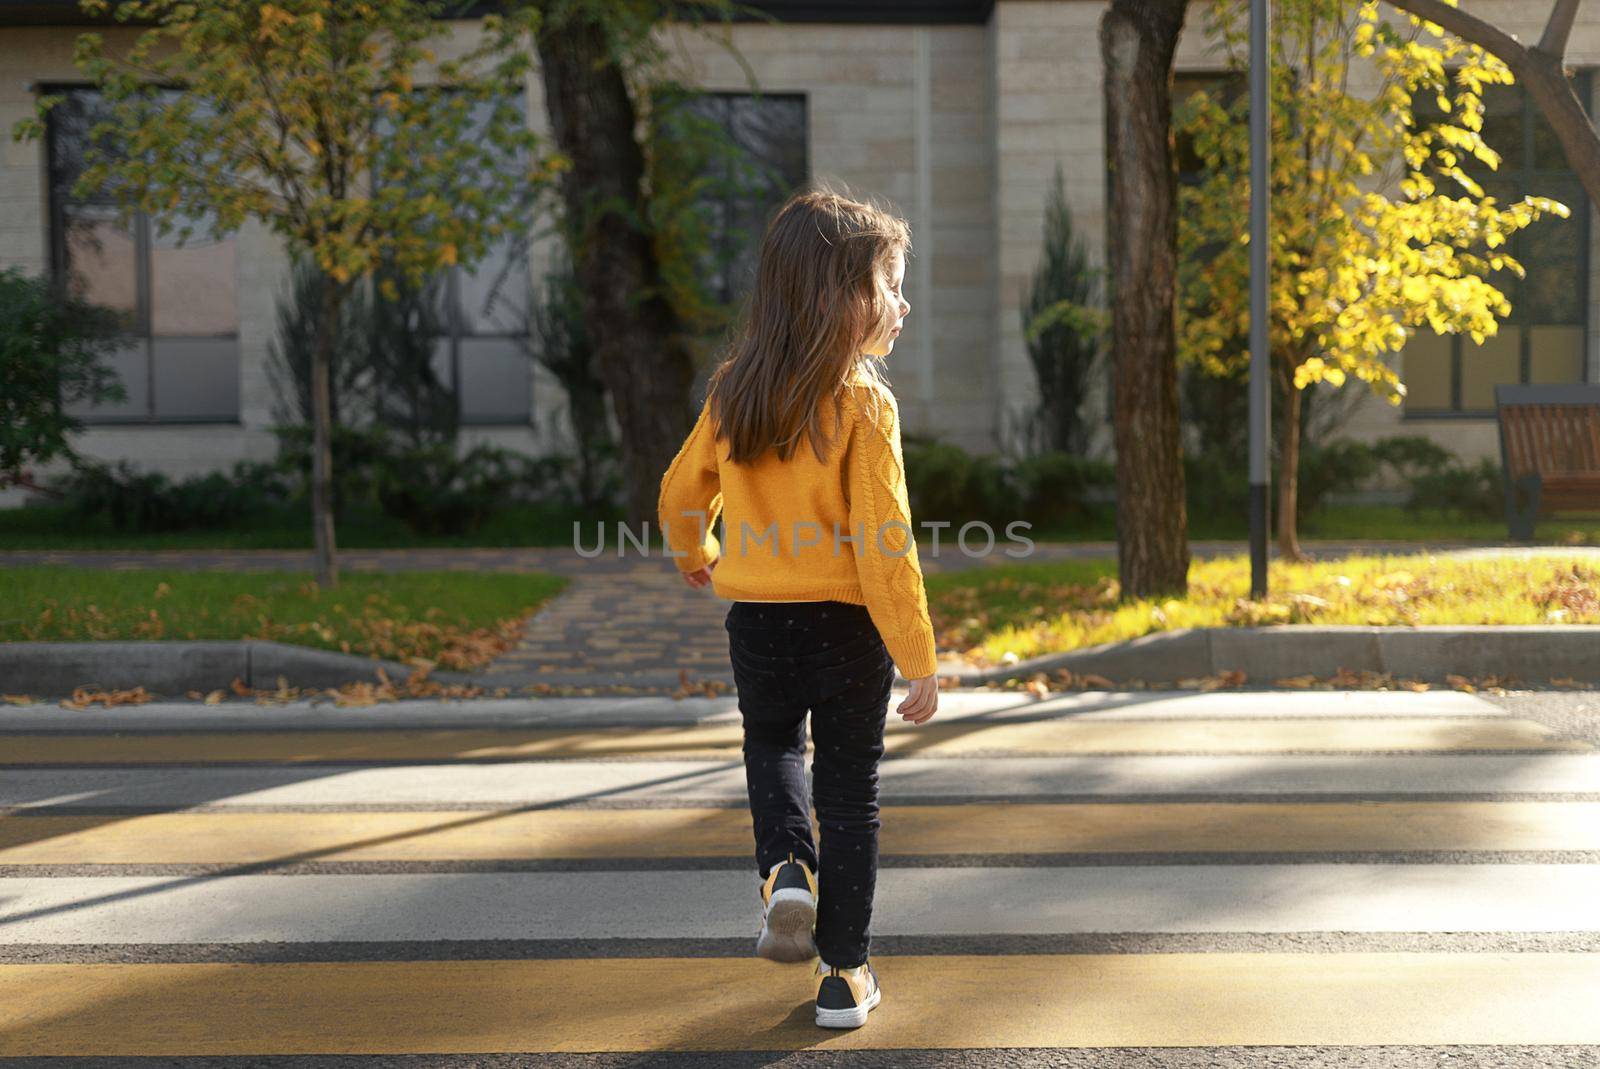 A little girl crosses the road on a zebra crossing, looks around.